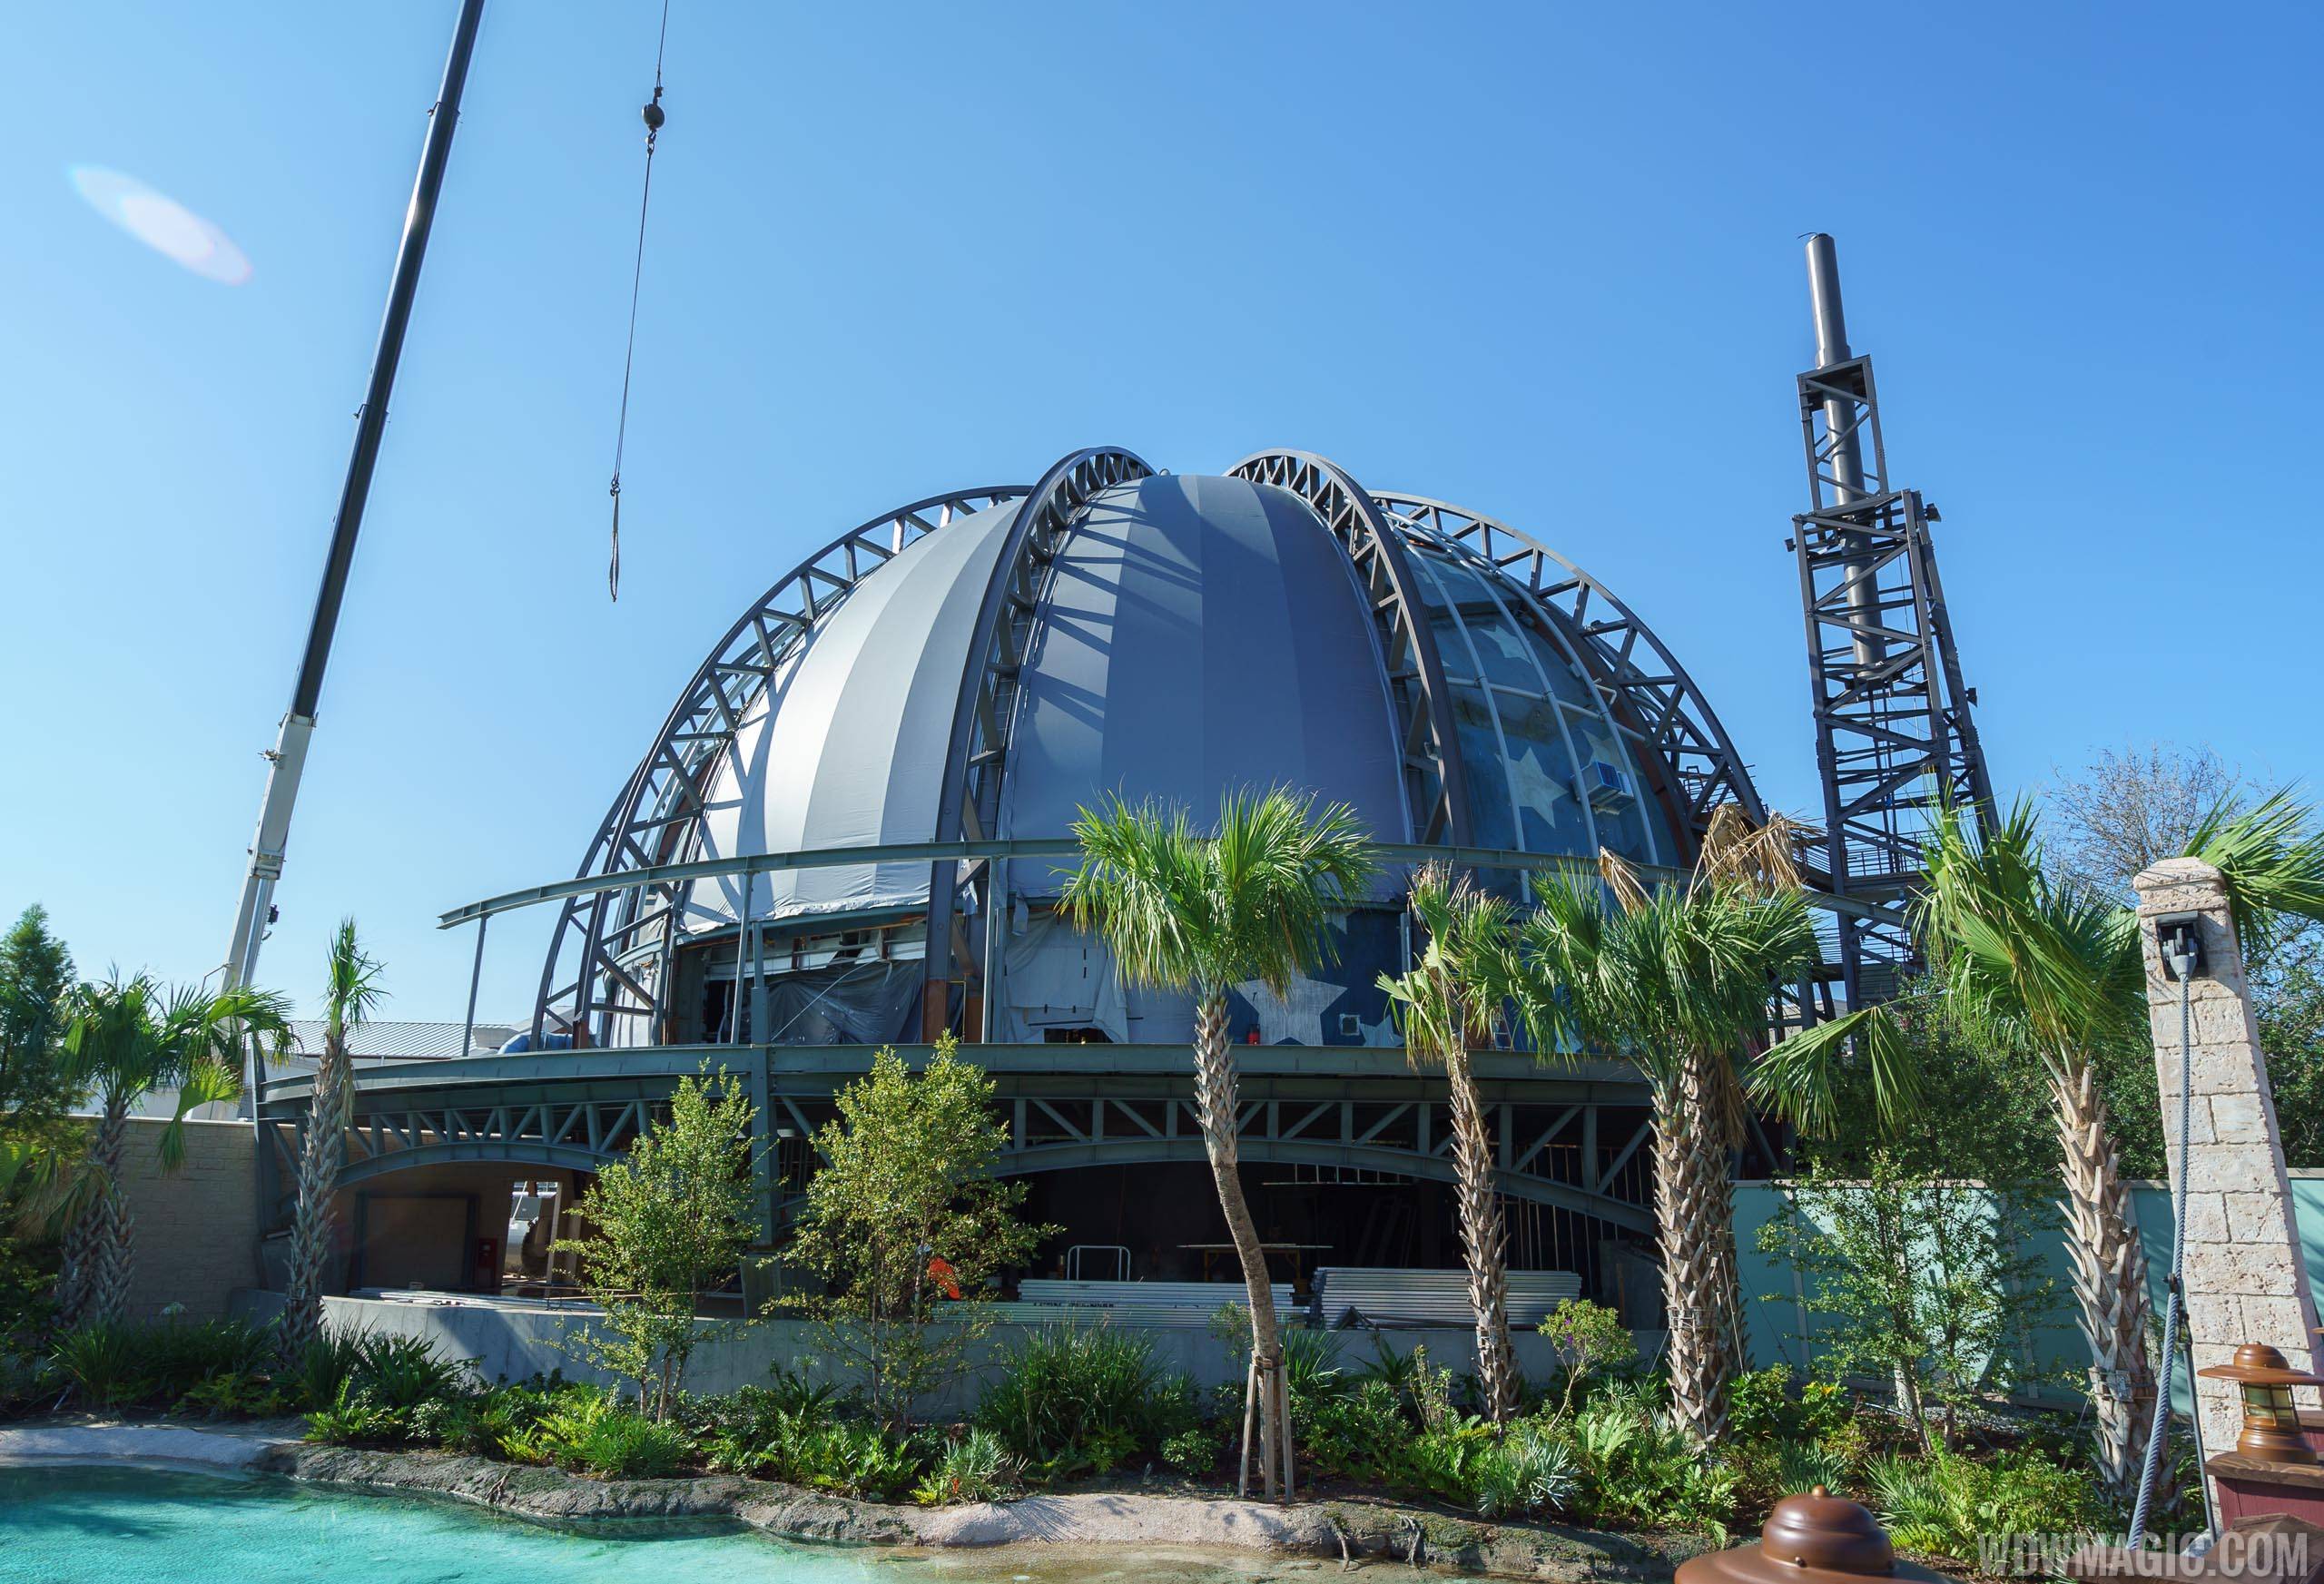 PHOTOS - New fabric outer skin for the upcoming Planet Hollywood Observatory